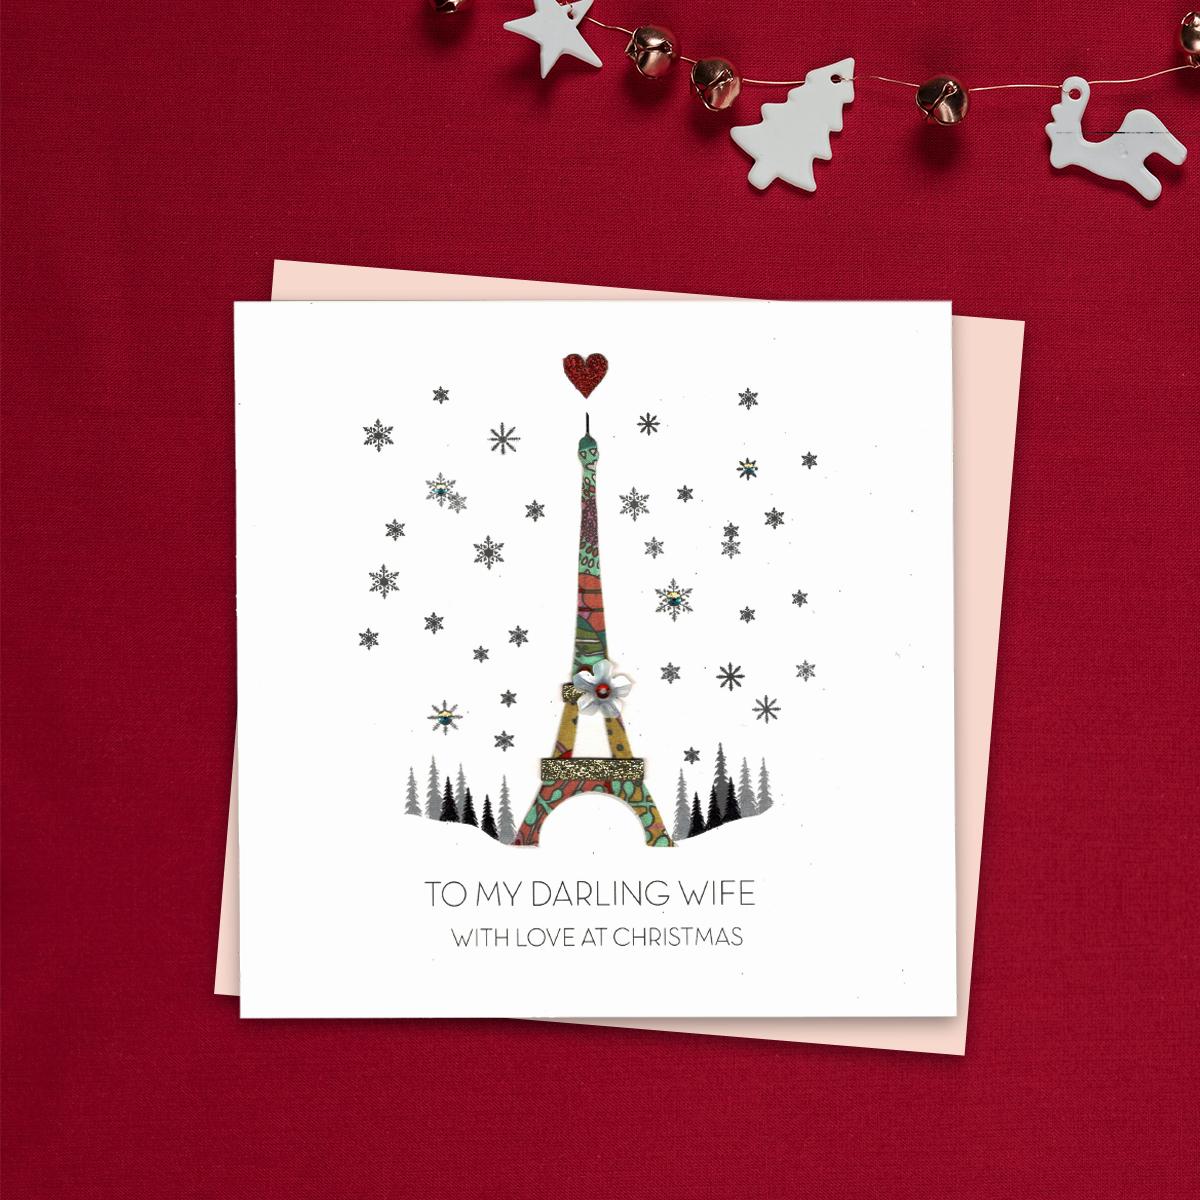 To My Darling Wife With Love At Christmas Featuring a Beautiful Decoupage Eiffel Tower. Finished With Gold Glitter Accents And Jewel Embellishments. Complete With Blush Coloured Envelope